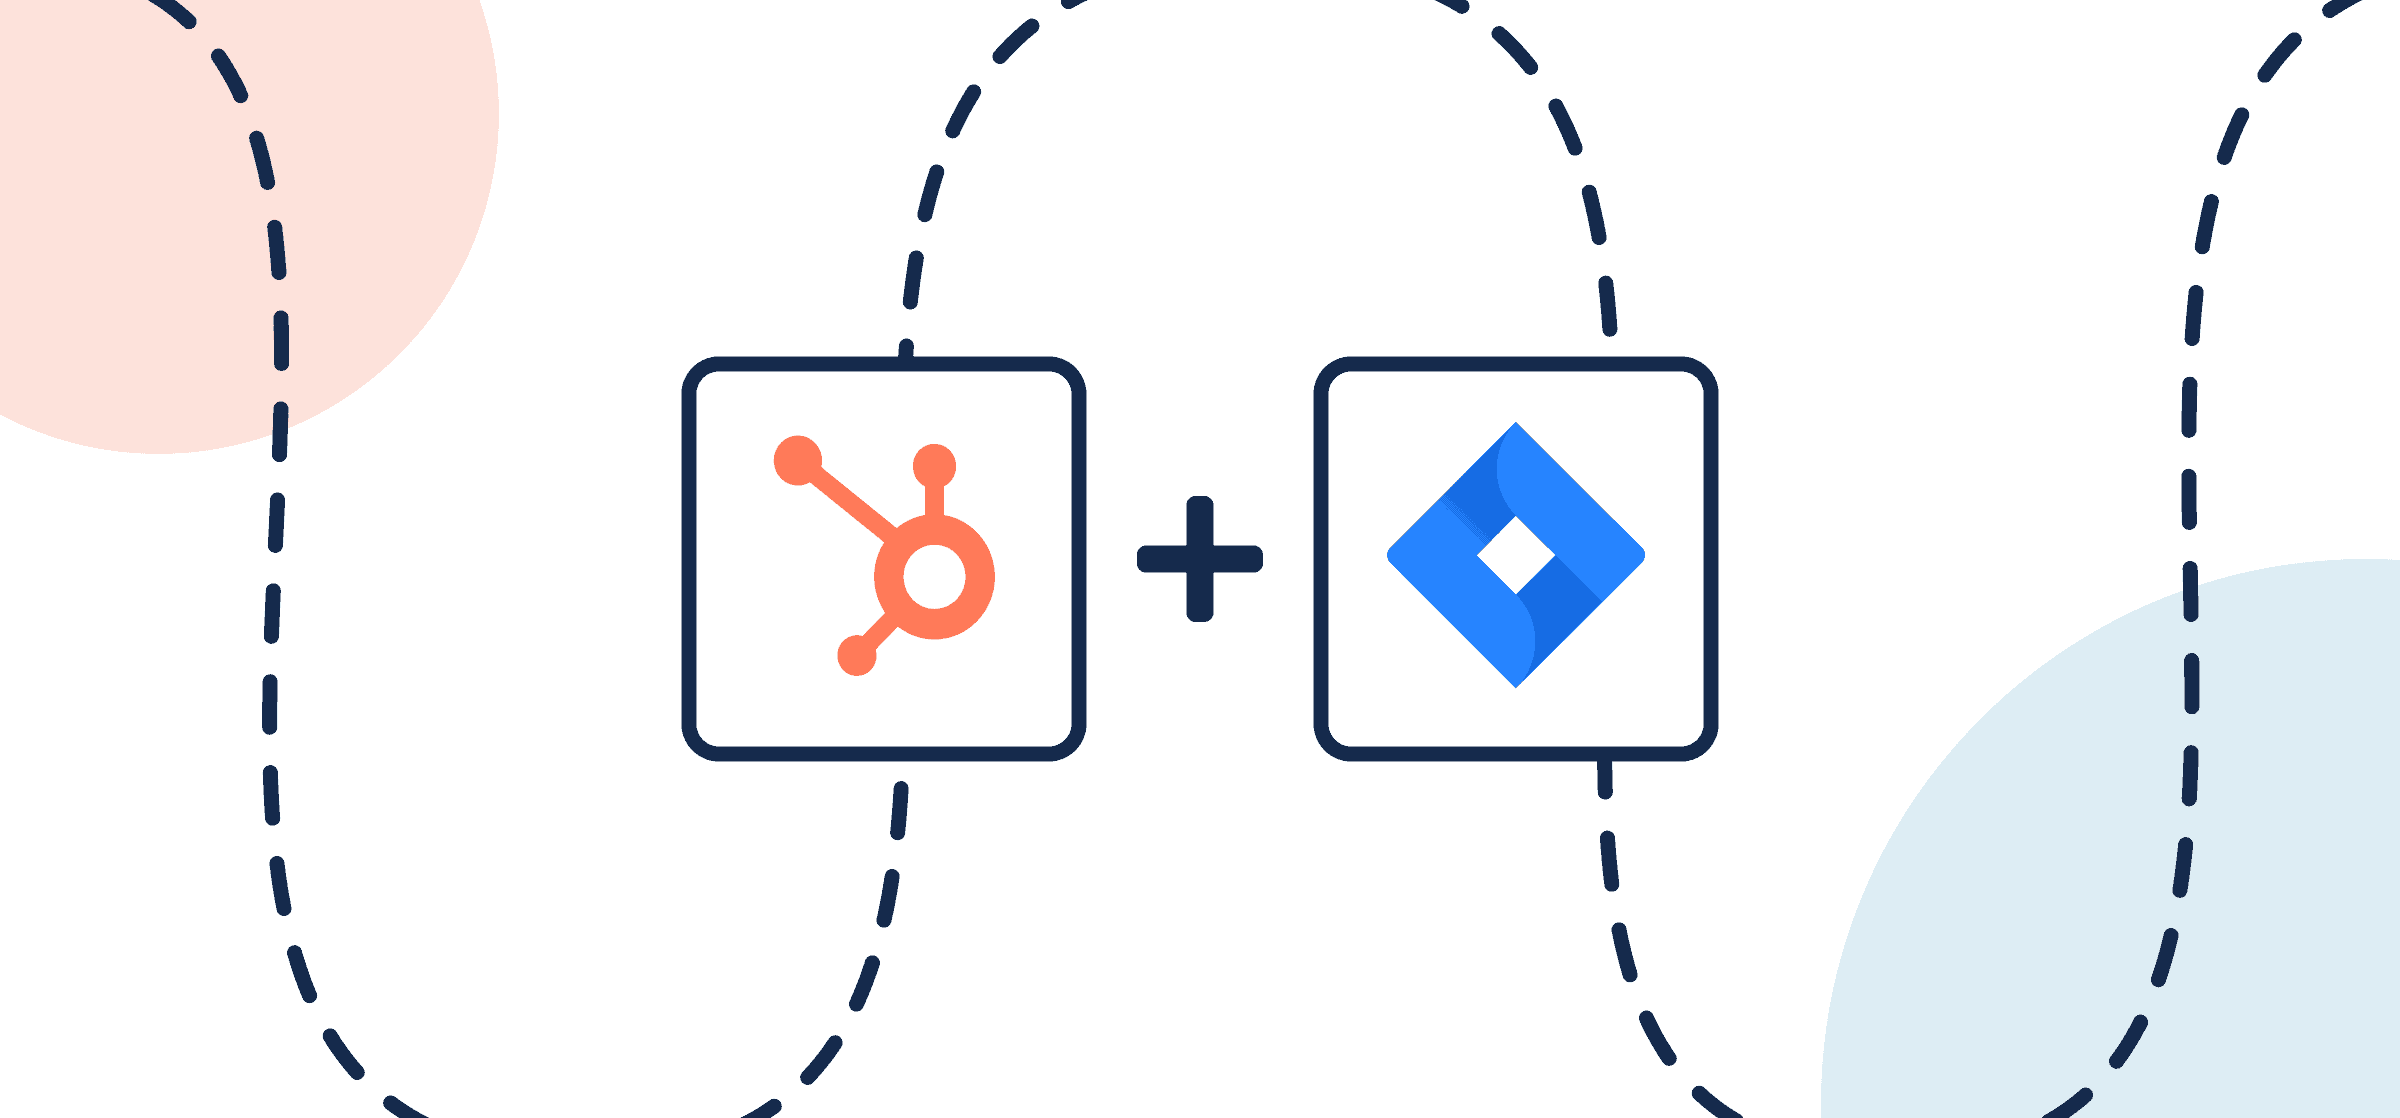 Featured image displaying the logos of Jira and HubSpot in Unito's guide to setting up a simple Two-Way Sync